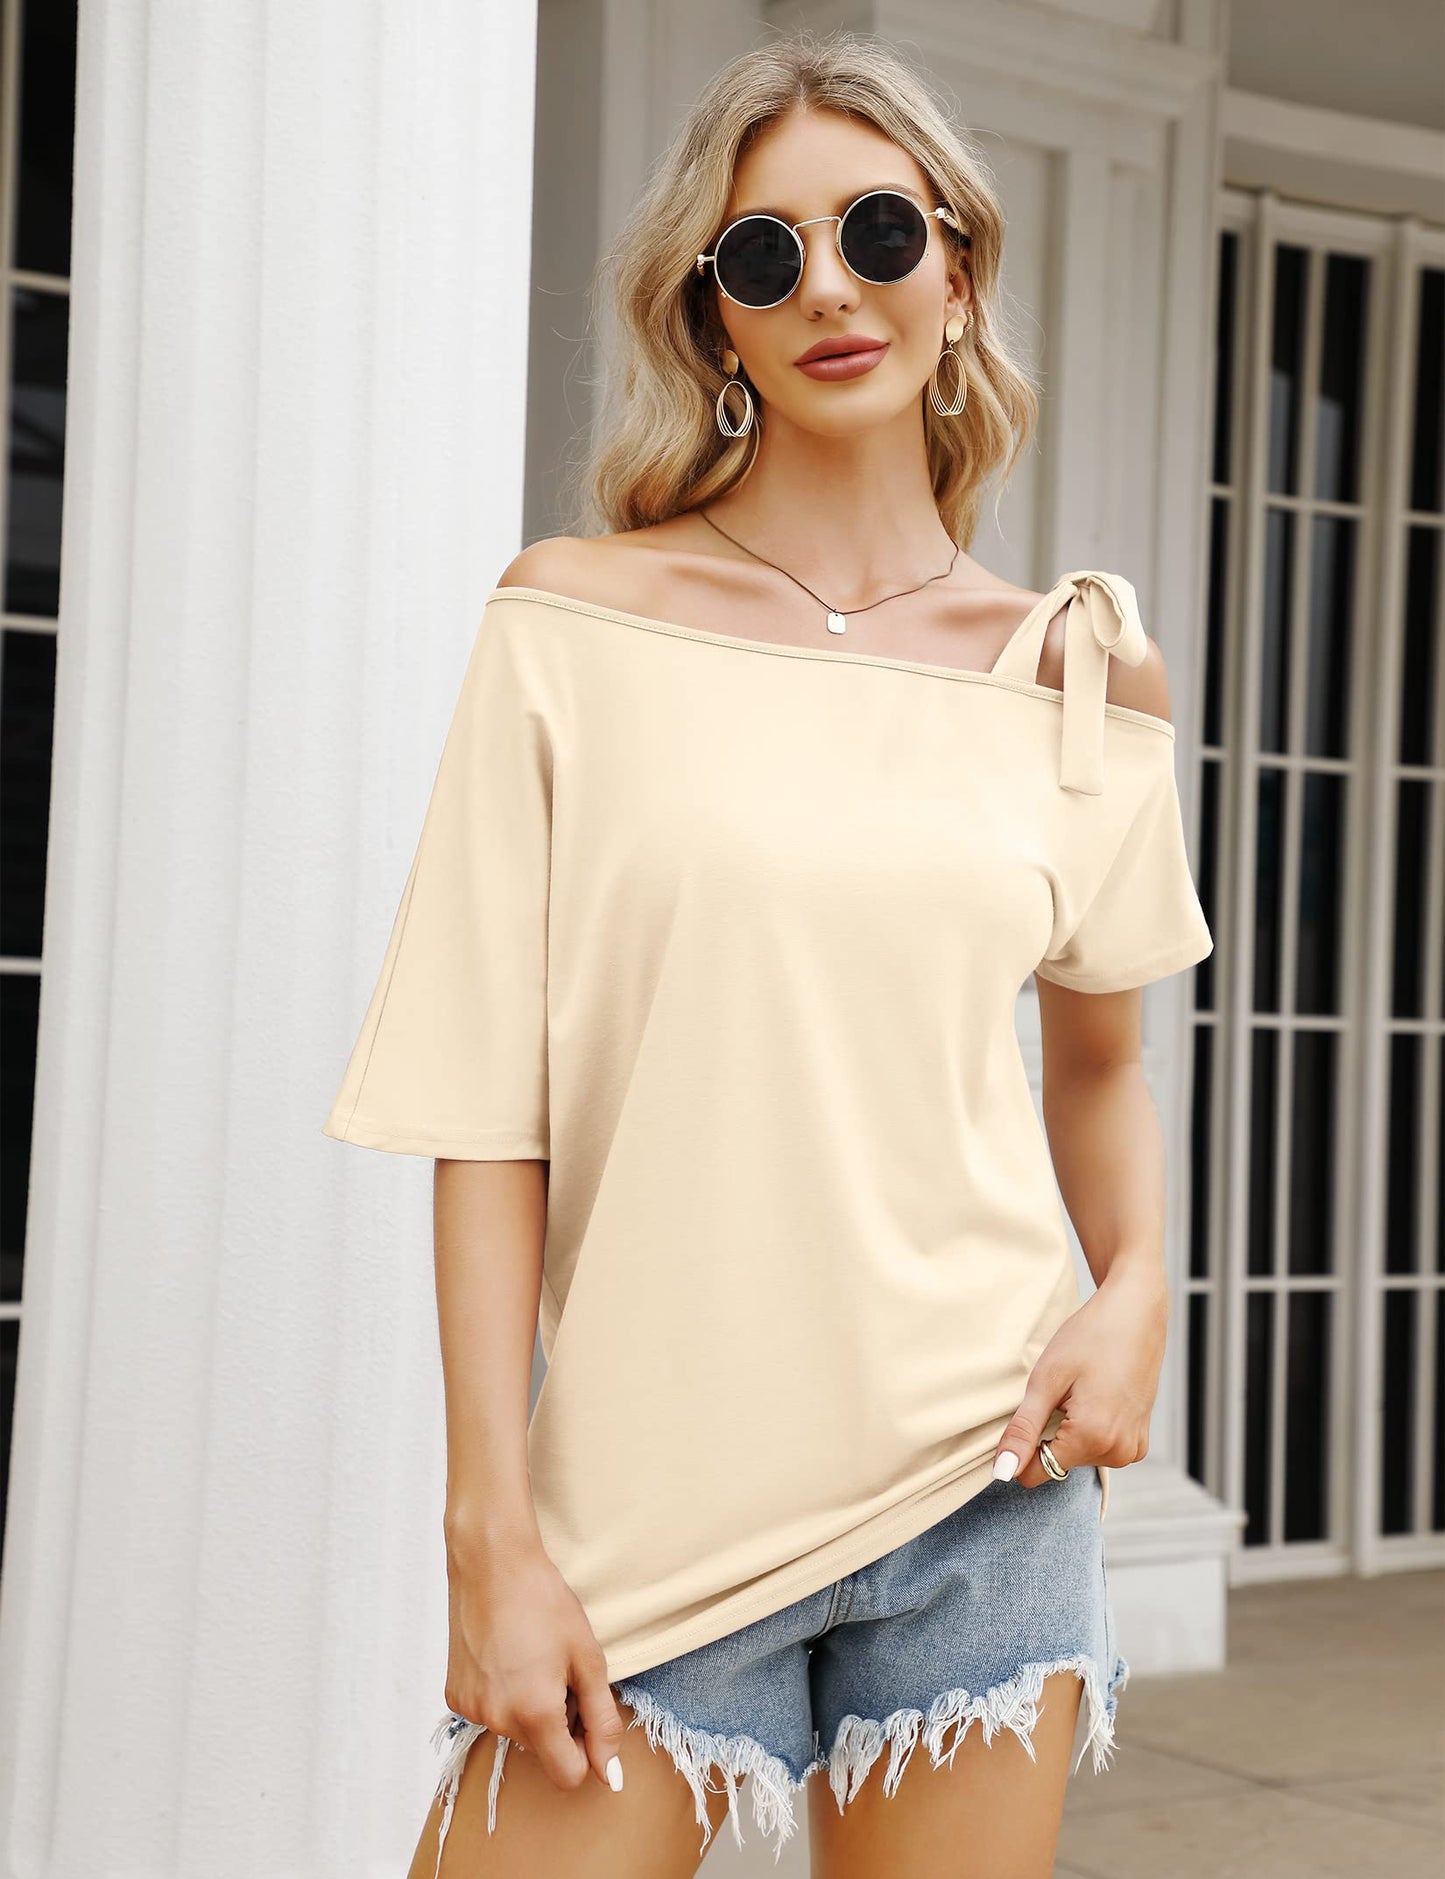 YESFASHION Women's Strapless Bow Tie Solid Color Casual T-Shirt Apricot